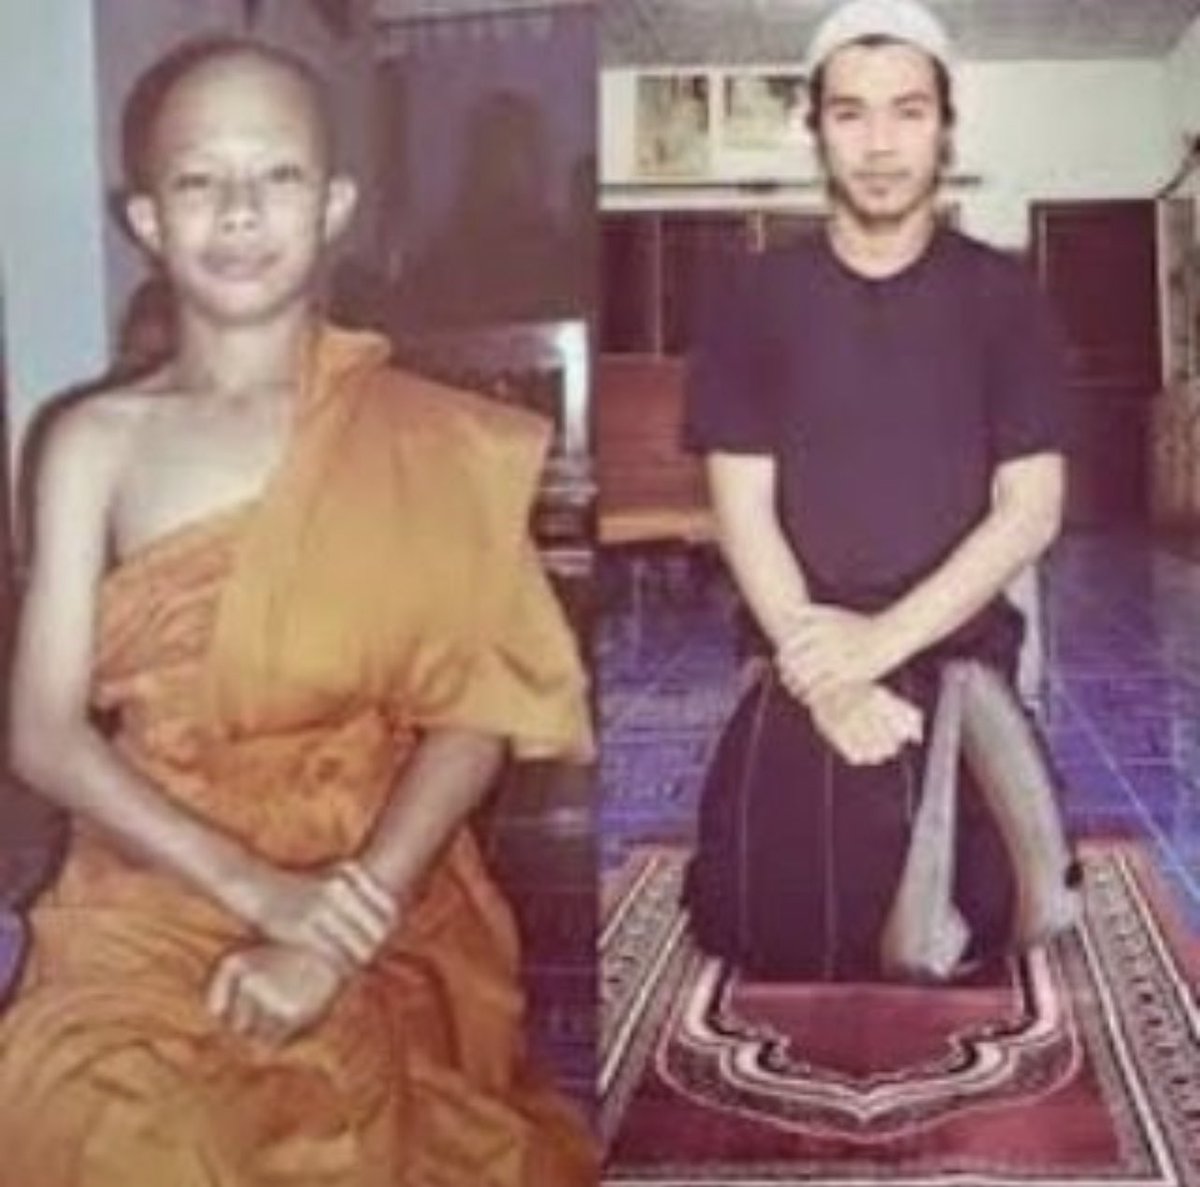 From Buddhism to Islam 🧡